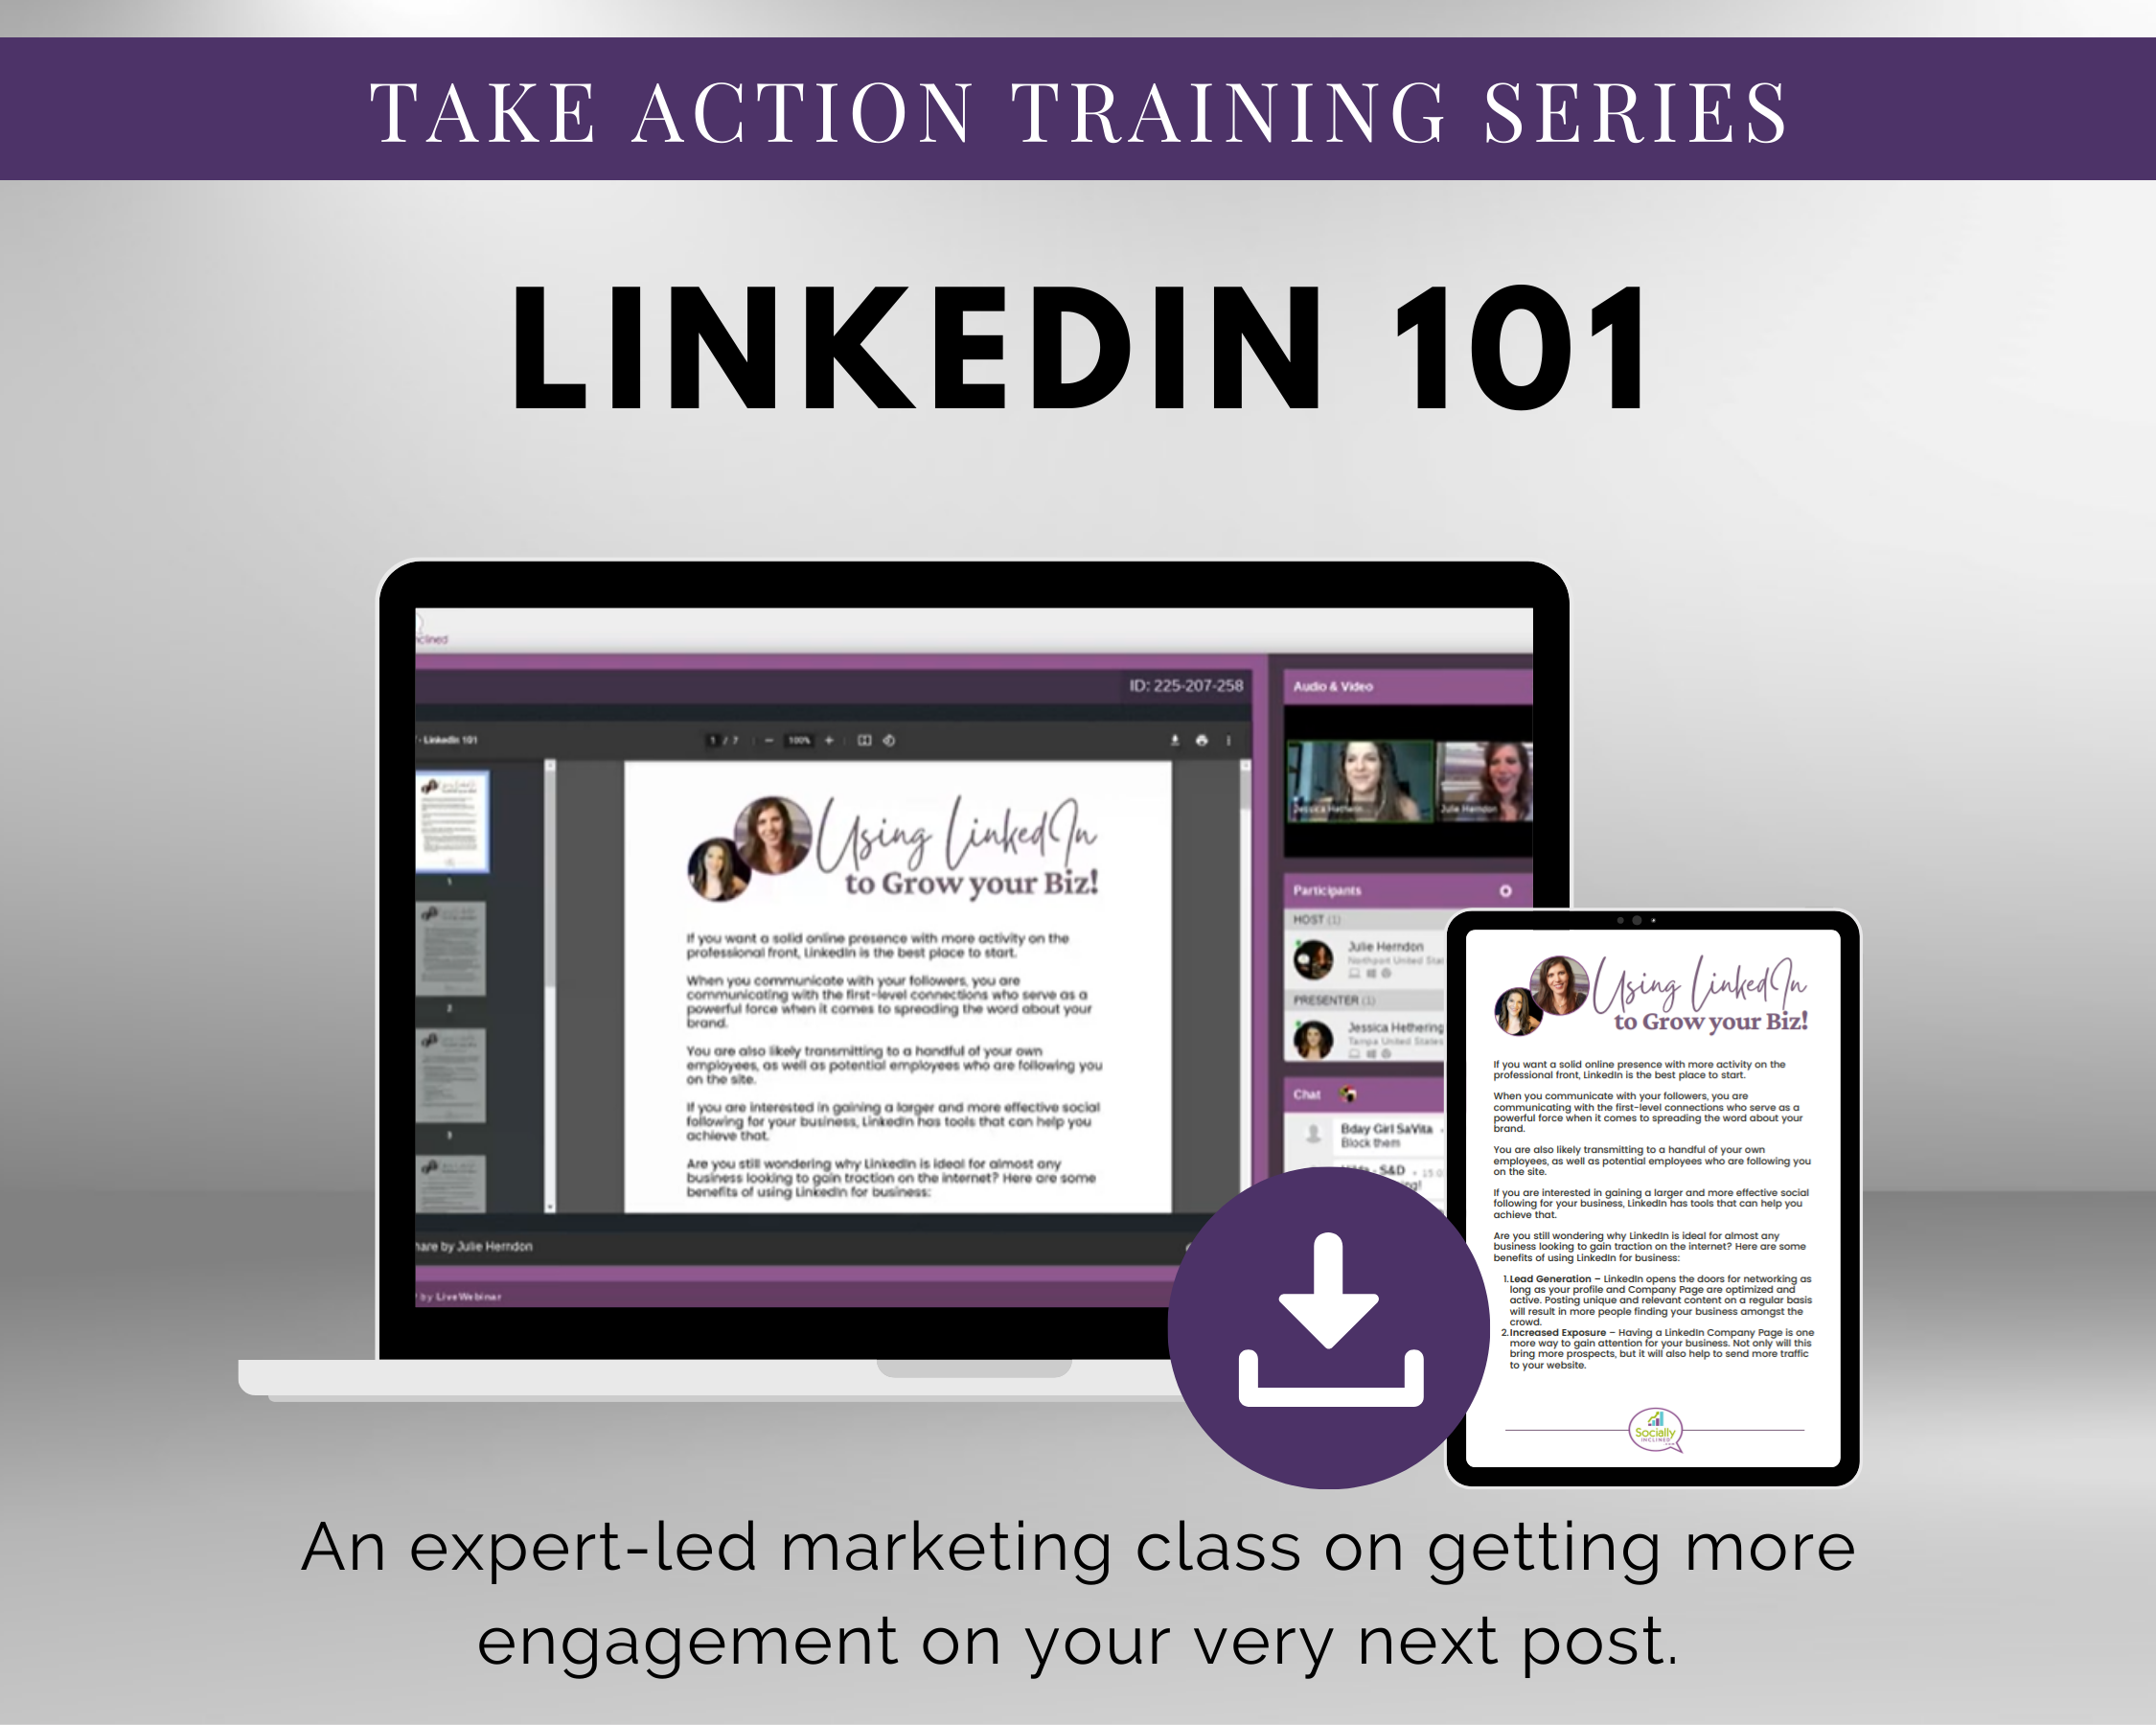 Take Get Socially Inclined's TAT - LinkedIn 101 Masterclass to enhance your skills and knowledge of using LinkedIn effectively. Learn the essentials of LinkedIn in this comprehensive LinkedIn 101 course.